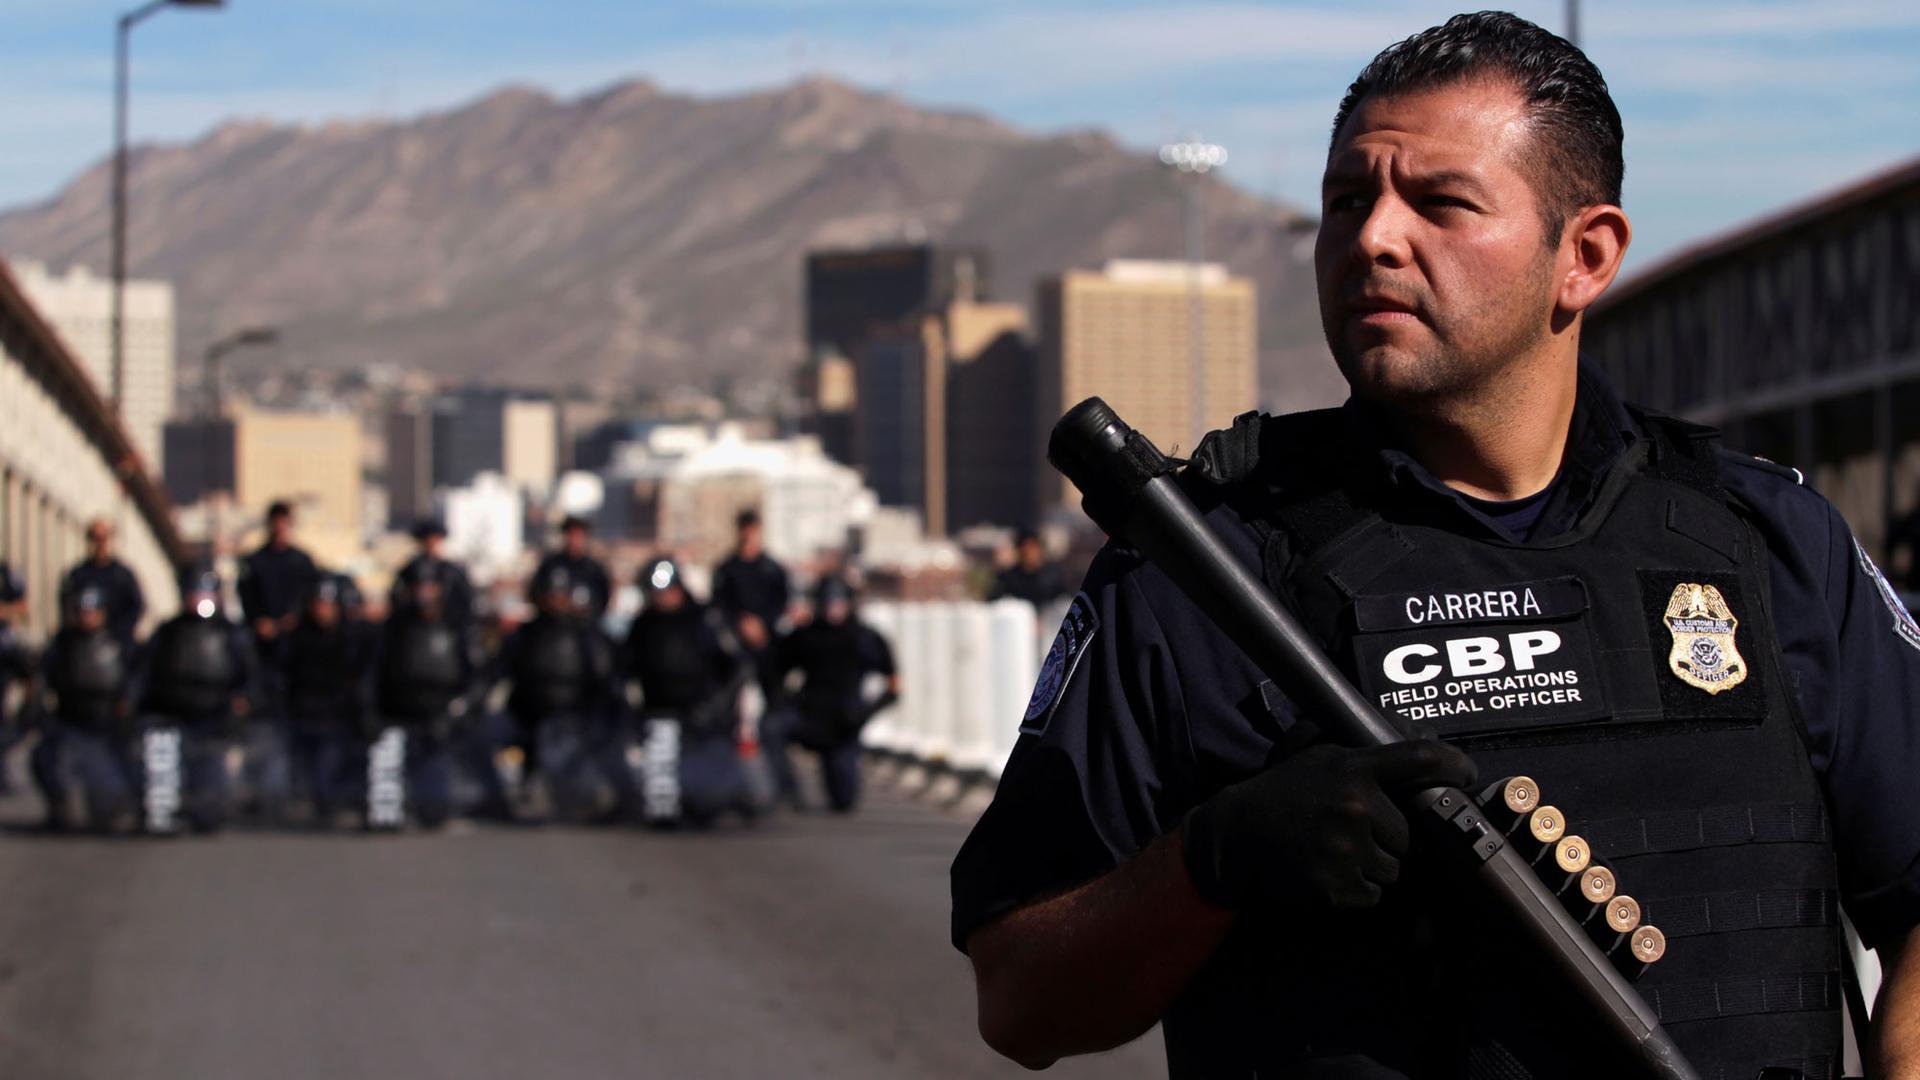 A US Custom and Border Protection agent stands in the foreground with a riffle additional agents armed in the distance.